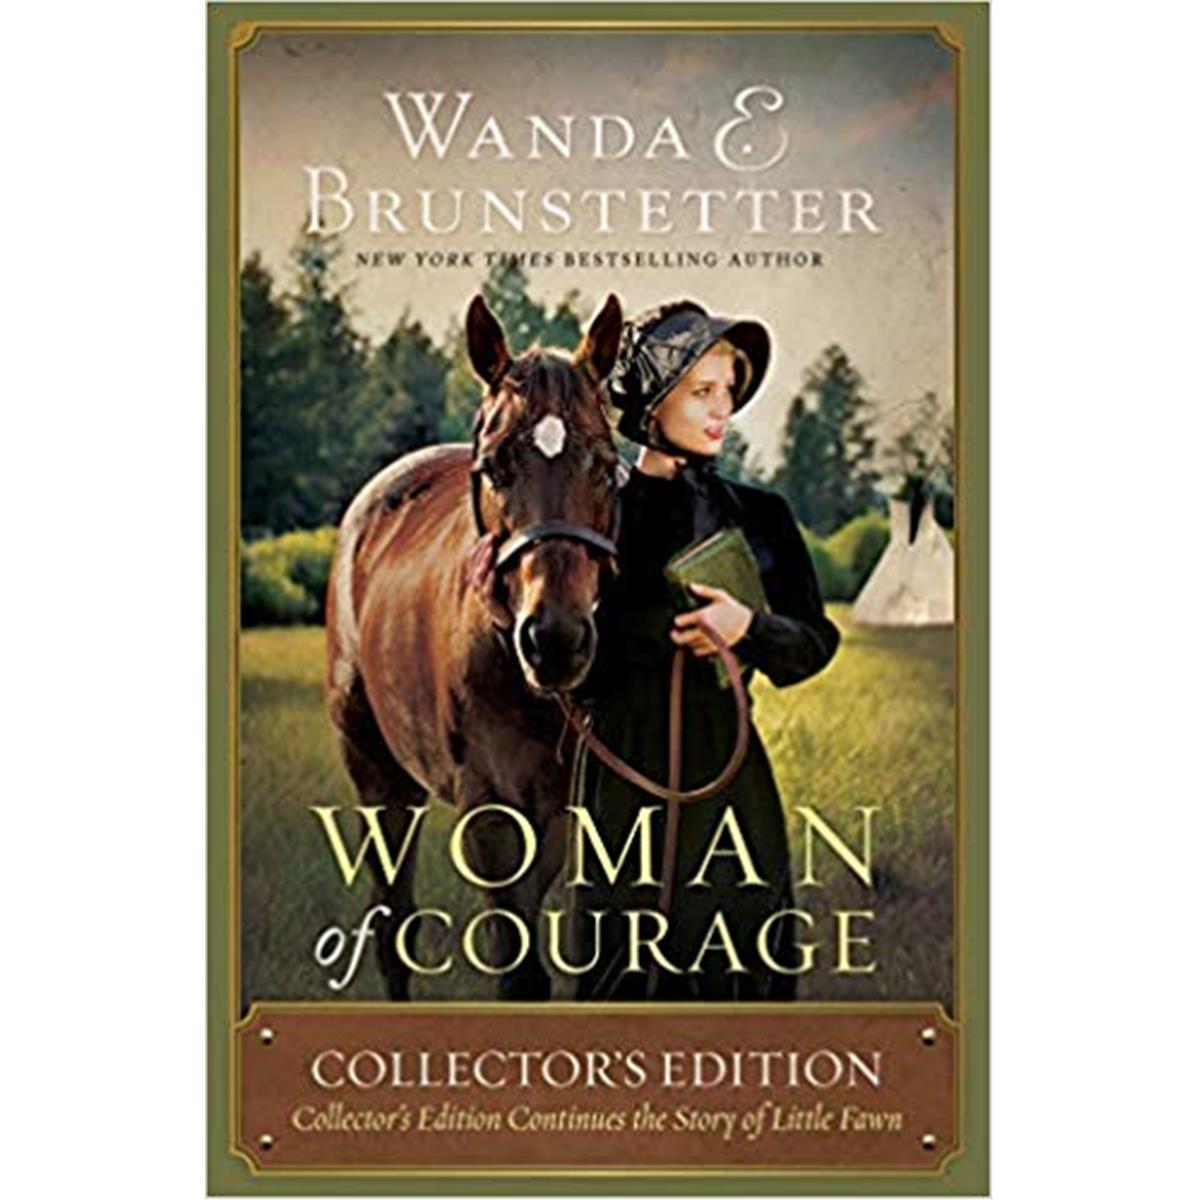 172399 Woman Of Courage - Collectors Edition